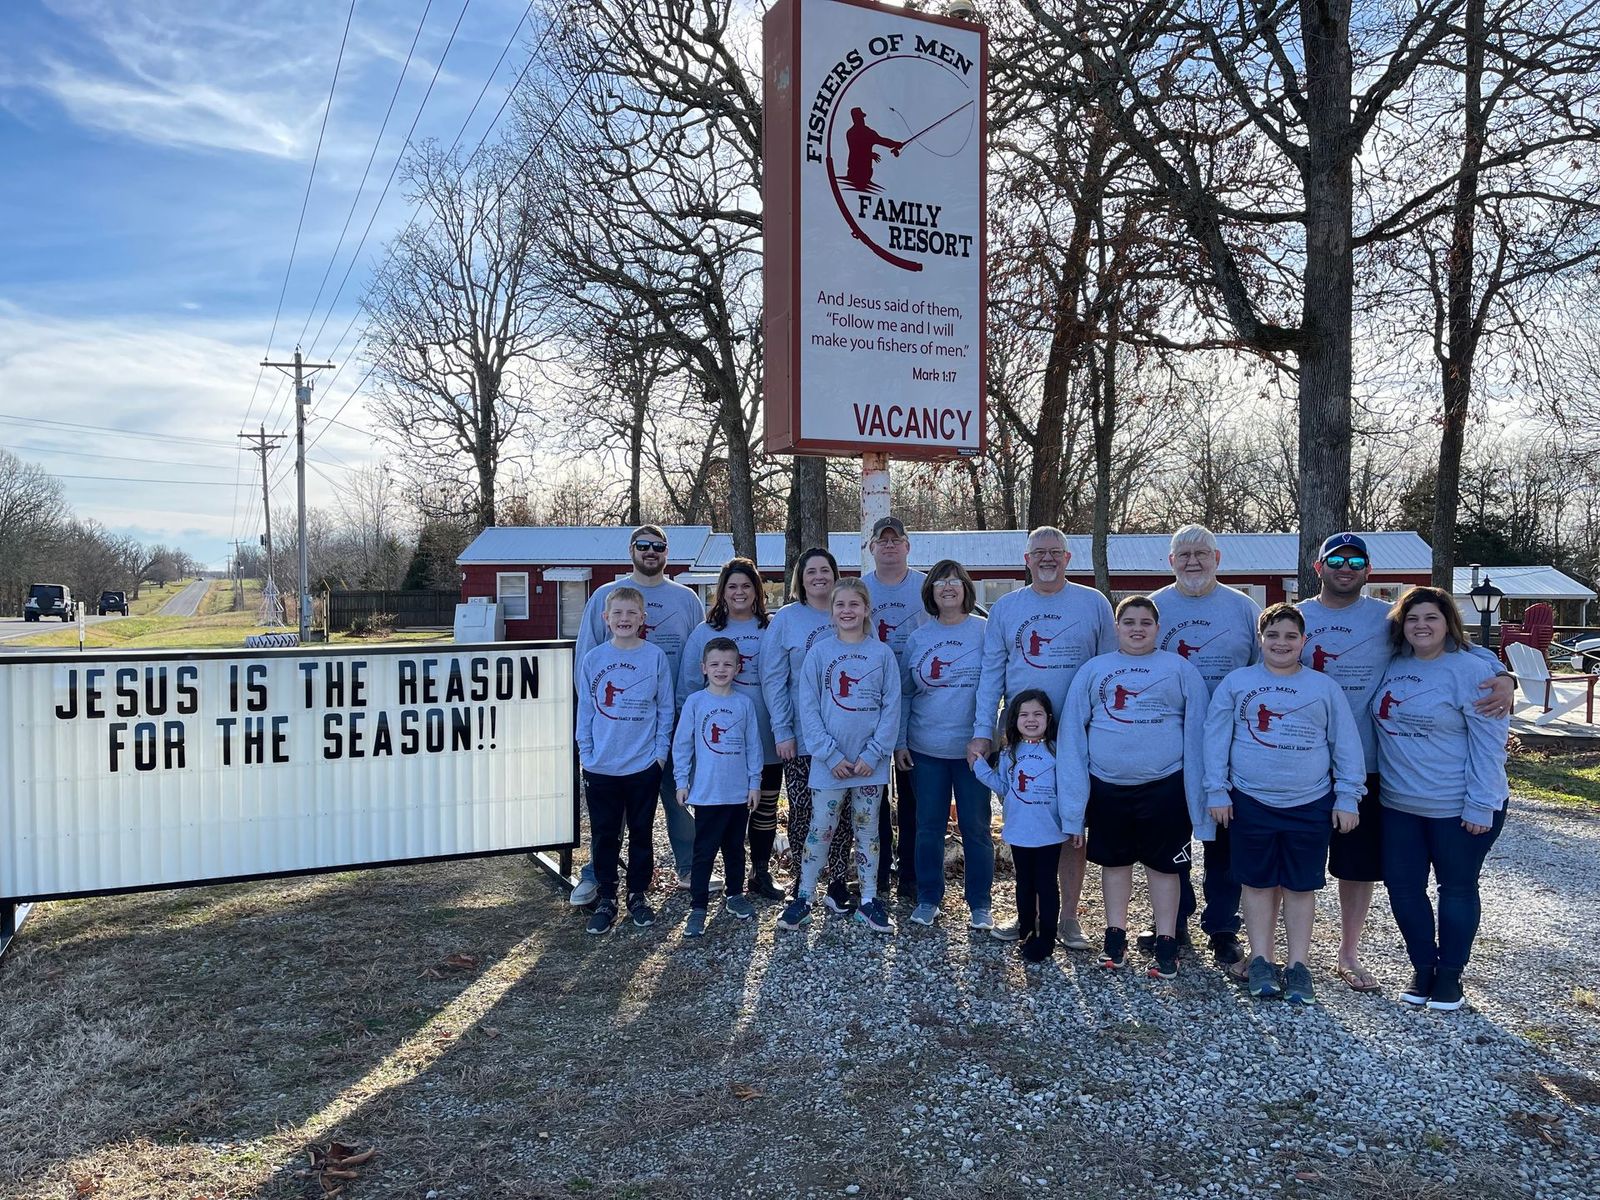 A group of people standing in front of a sign that says jesus is the reason for the season